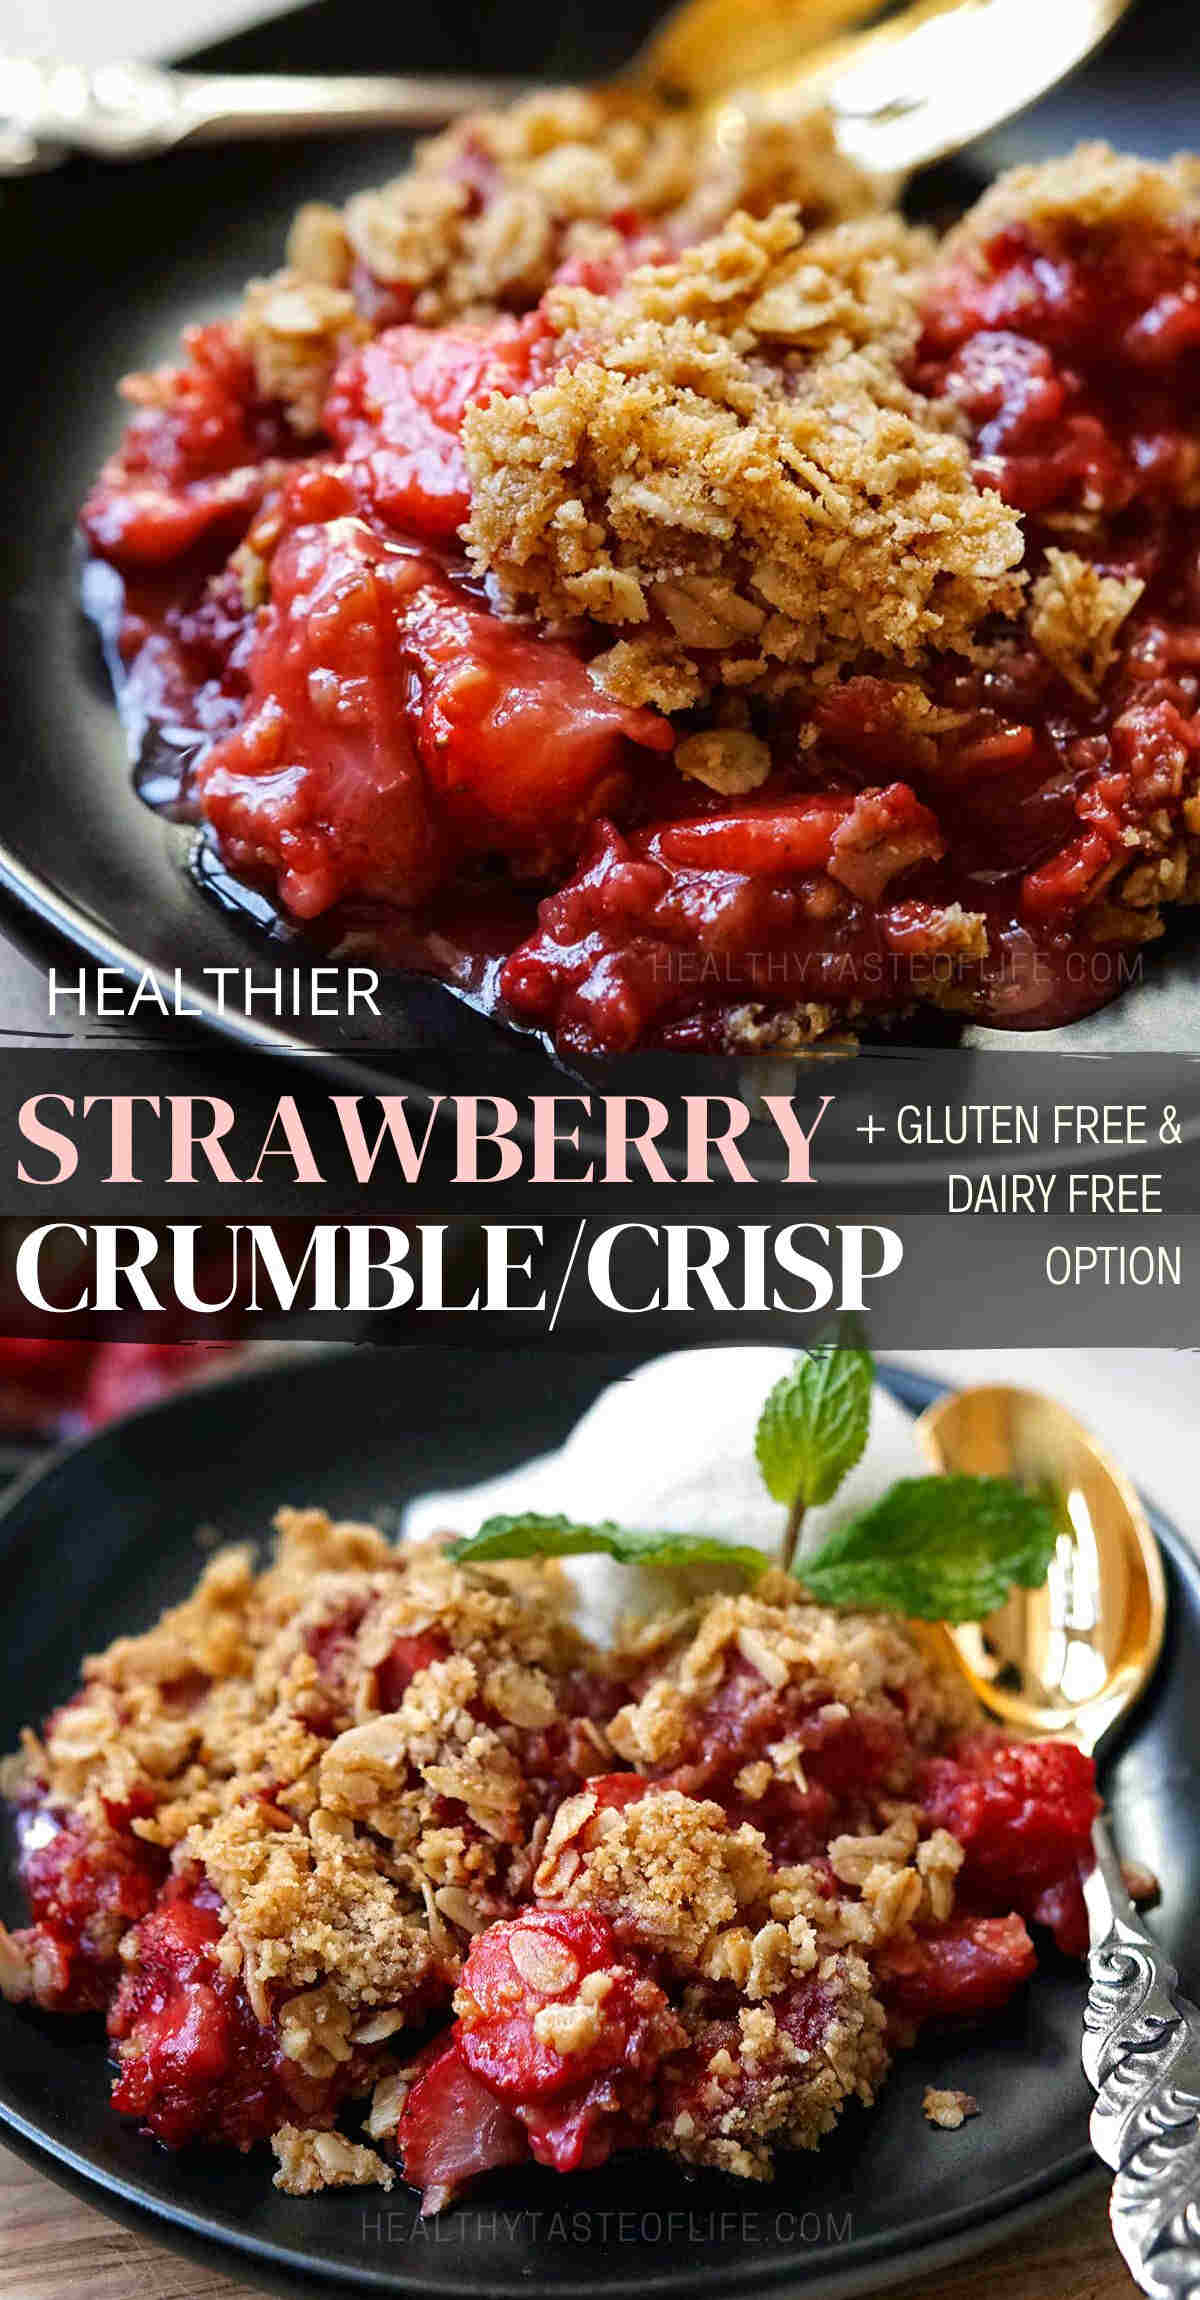 A delicious strawberry crumble recipe with healthier ingredients. This strawberry dessert comprises a caramelized strawberry filling topped with a mixture of rolled oats, sweetener, butter, and a touch of flour. It all goes into the oven and is baked until it’s golden brown, crisp and bubbly similar to a strawberry crisp. This strawberry crumble recipe can be made gluten free, dairy free, vegan and still taste delicious. #strawberrycrumble #strawberrycrisp #strawberrydessert #healthydessert